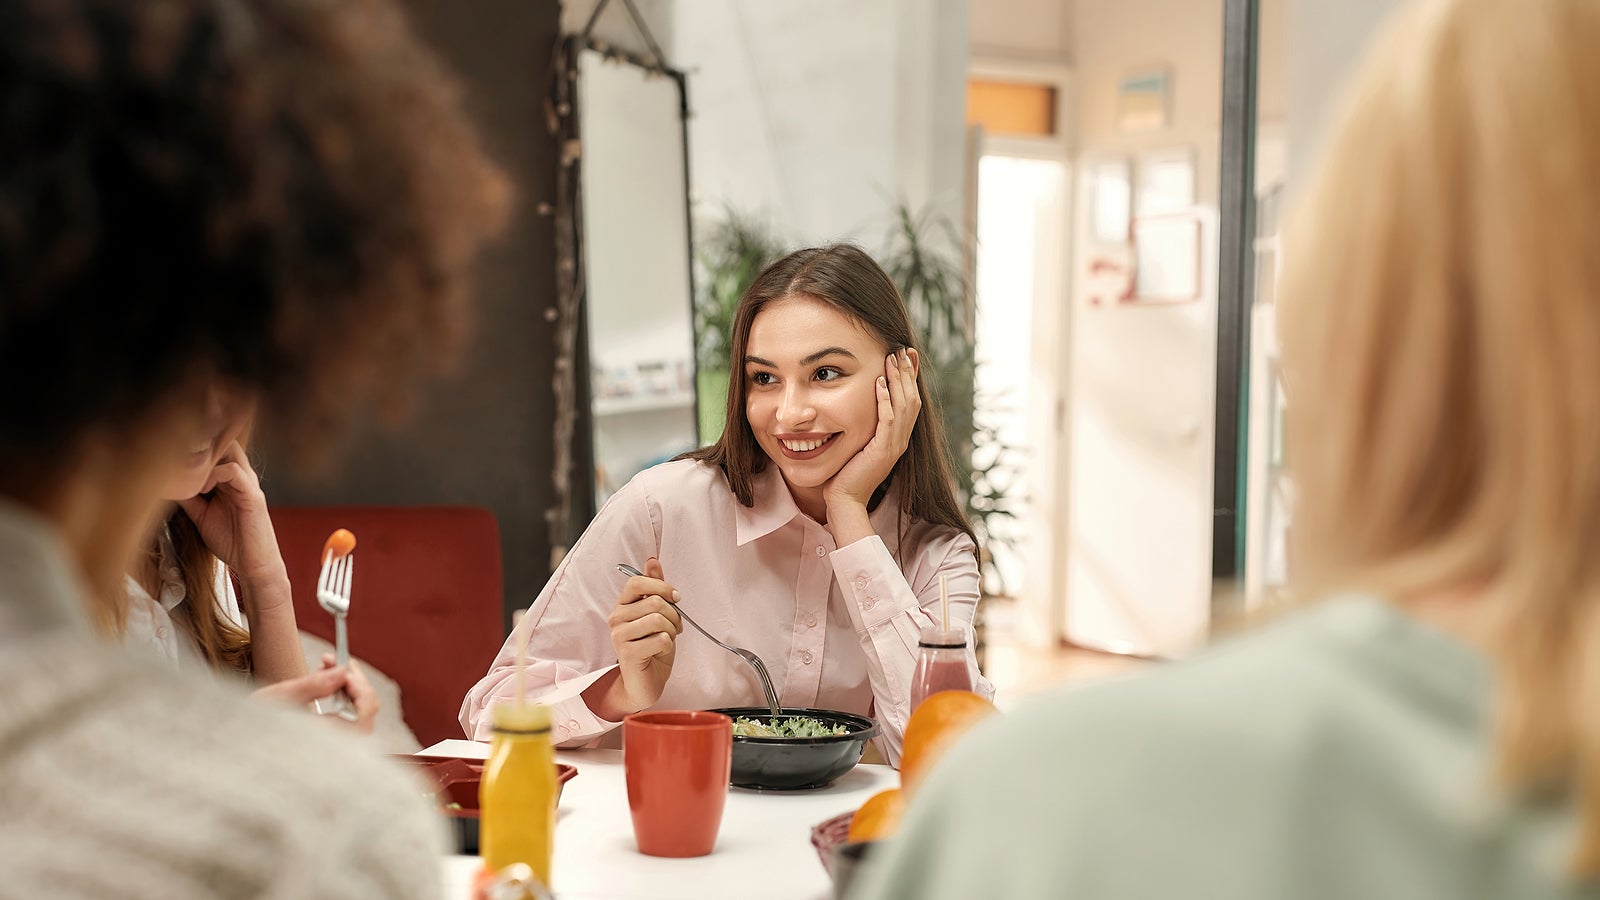 Business lunch. A fashionably dressed young brown haired woman smiling and sitting at a table with her female collaborateurs during a business lunch in a well-lighted creative office